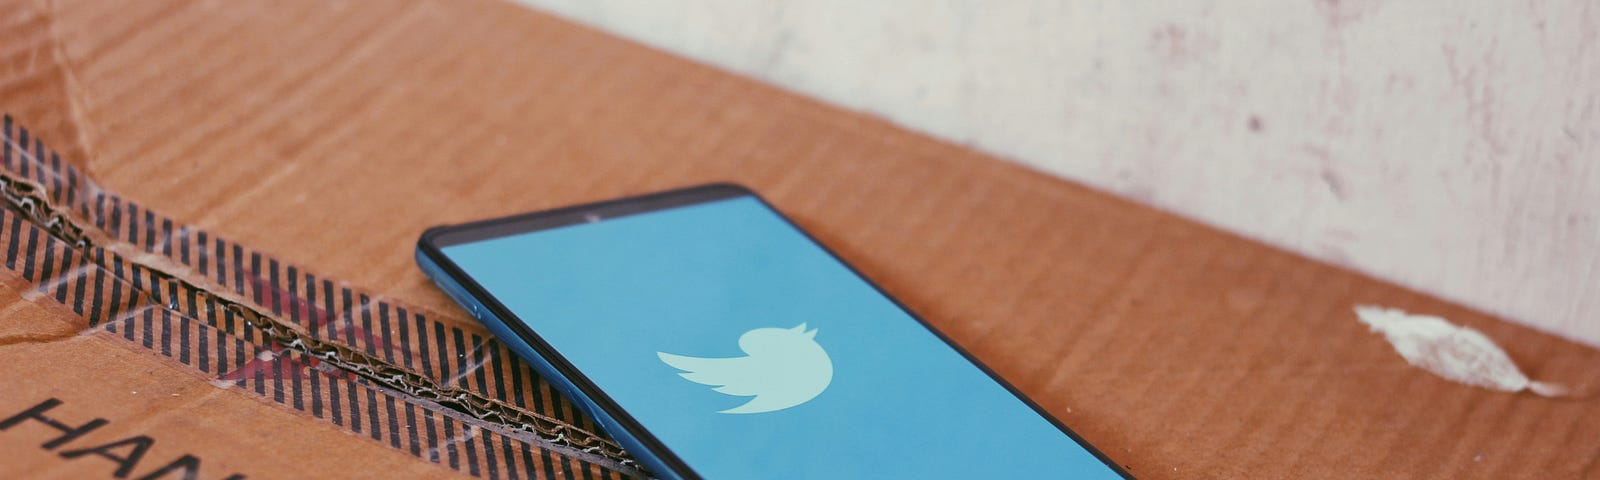 A phone with the twitter bird logo on its screen sits on a cardboard box with the words “handle with care” on it.